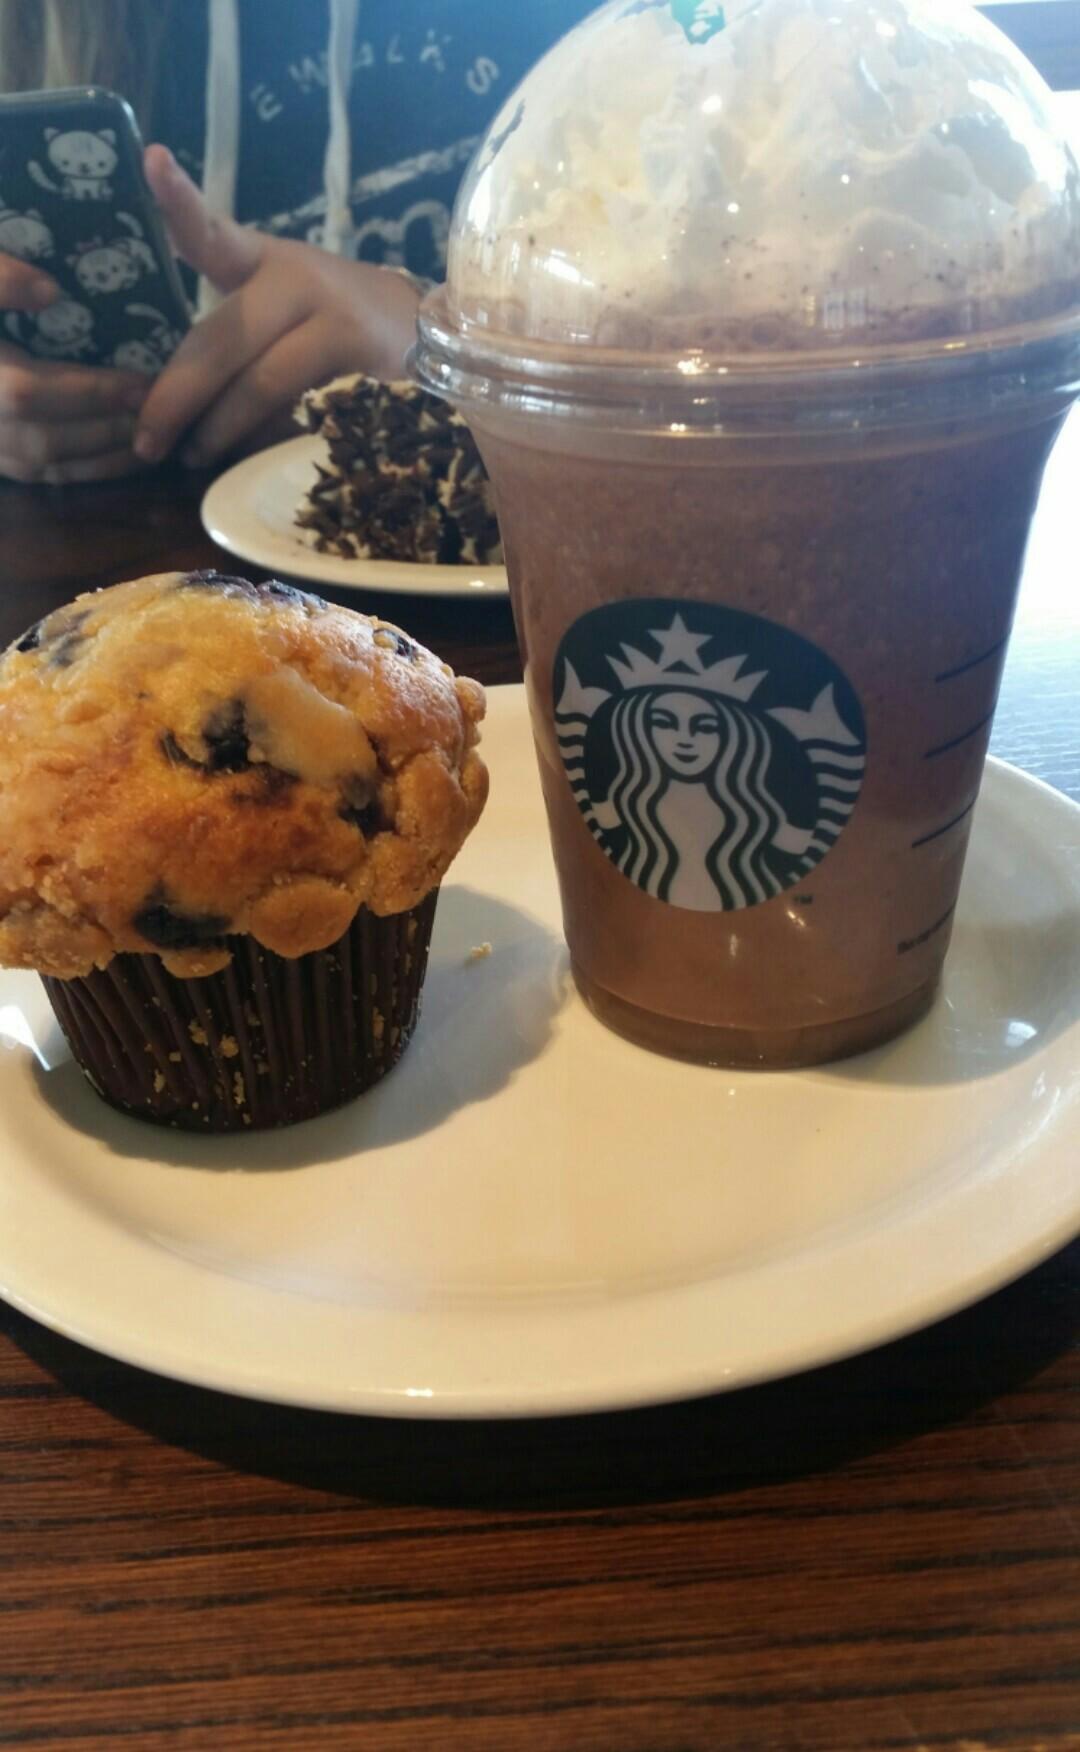 Starbucks. bleberry muffin and chocolate chip frappe with the coffee in 